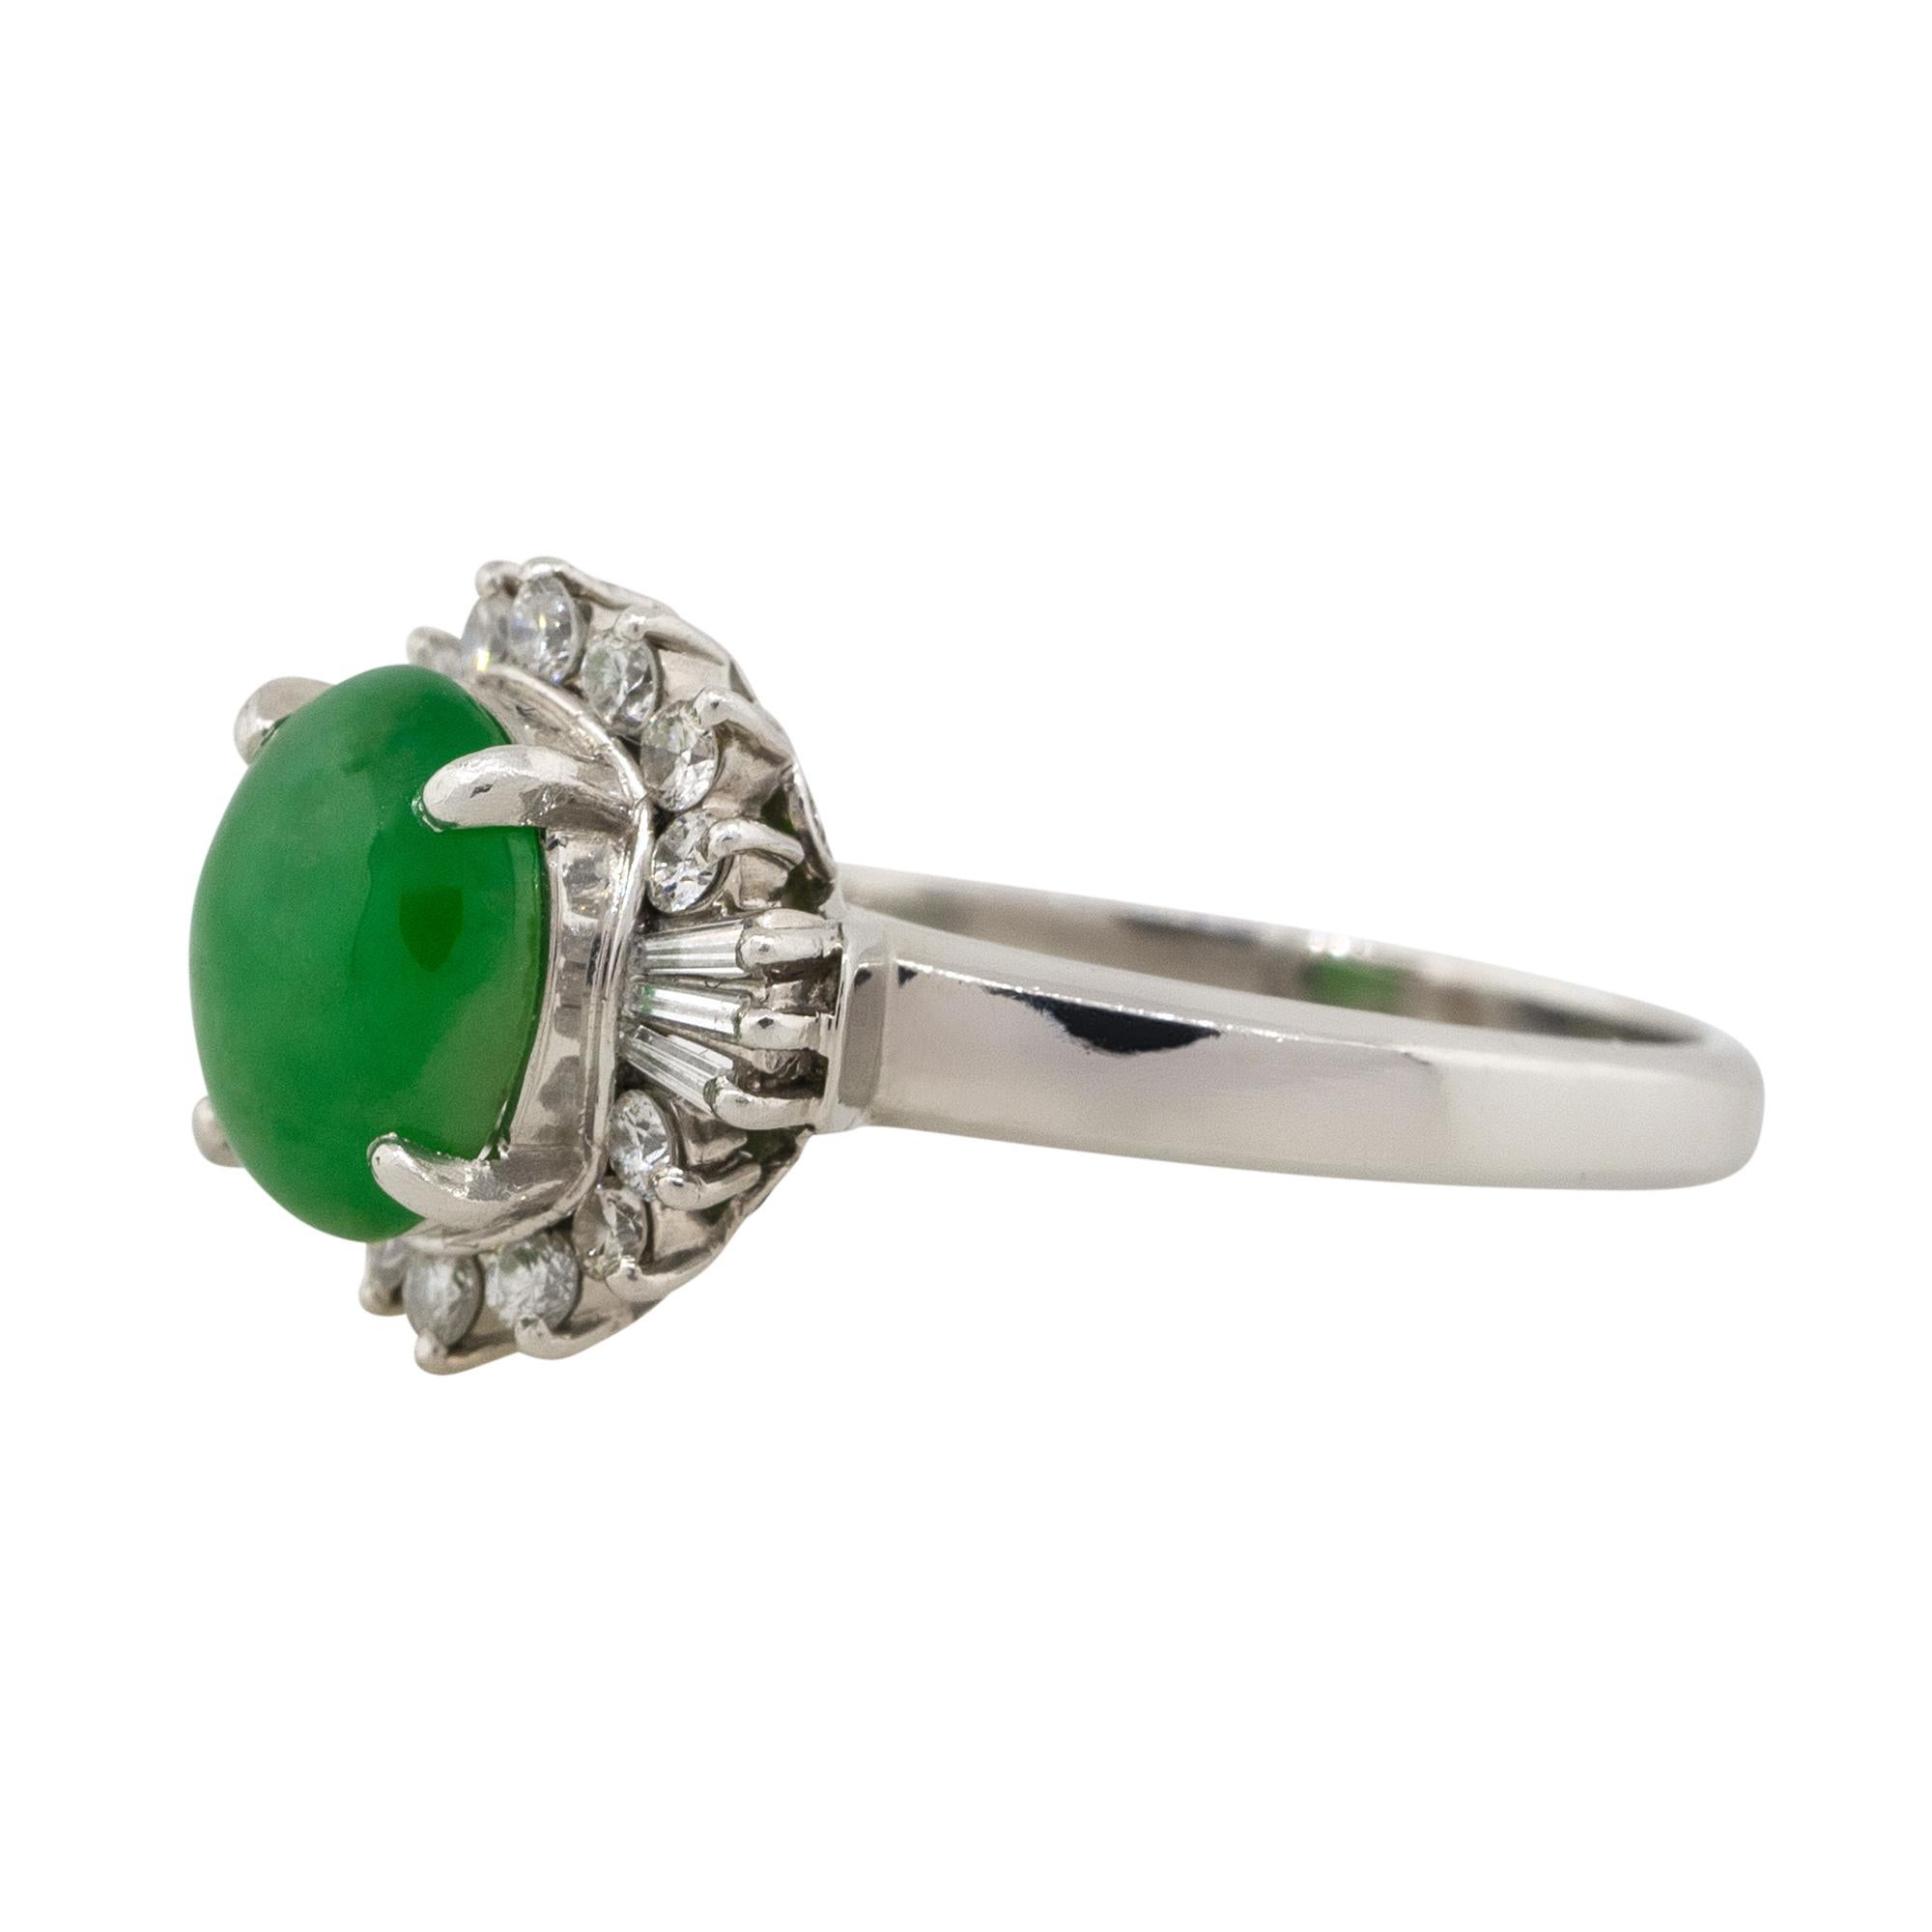 Material: Platinum
Gemstone details: Jade cabochon center gemstone
Diamond details: Approx. 0.46ctw of round & baguette cut Diamonds. Diamonds are G/H in color and VS in clarity
Ring Size: 8.5 
Ring Measurements: 0.90